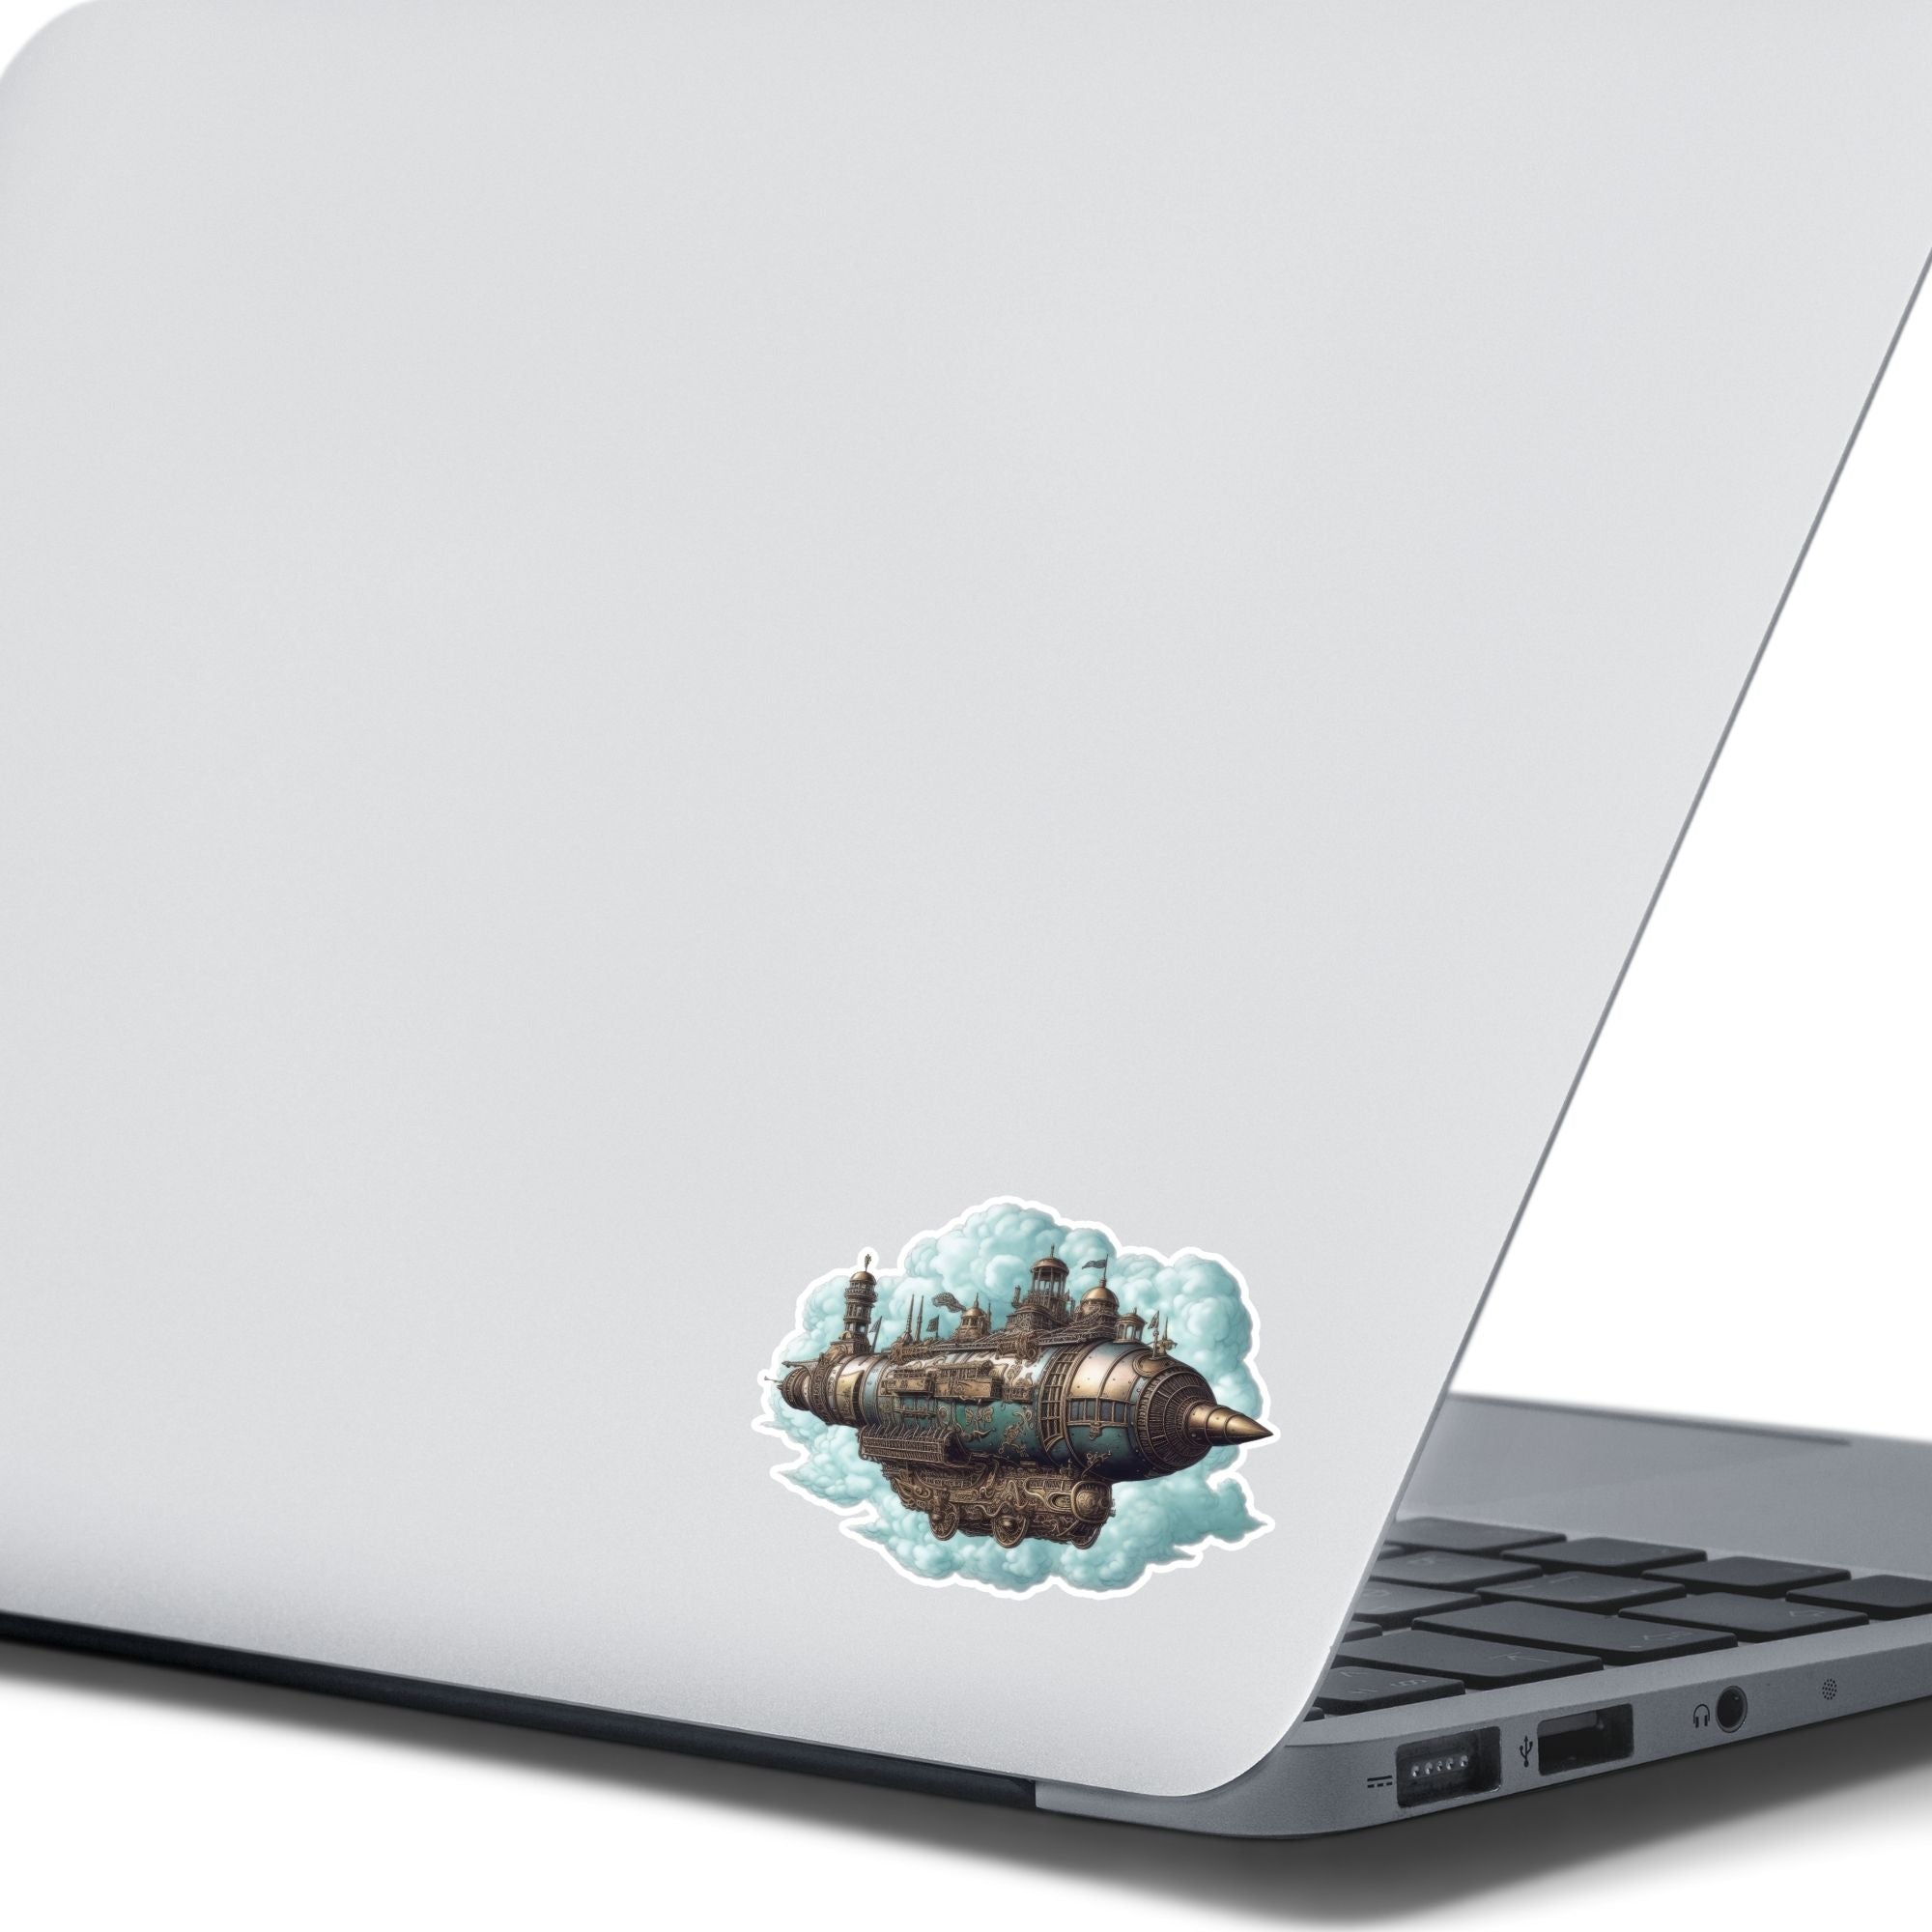 This image shows the Steampunk Airship 4 Die-Cut Sticker on the back of an open laptop.